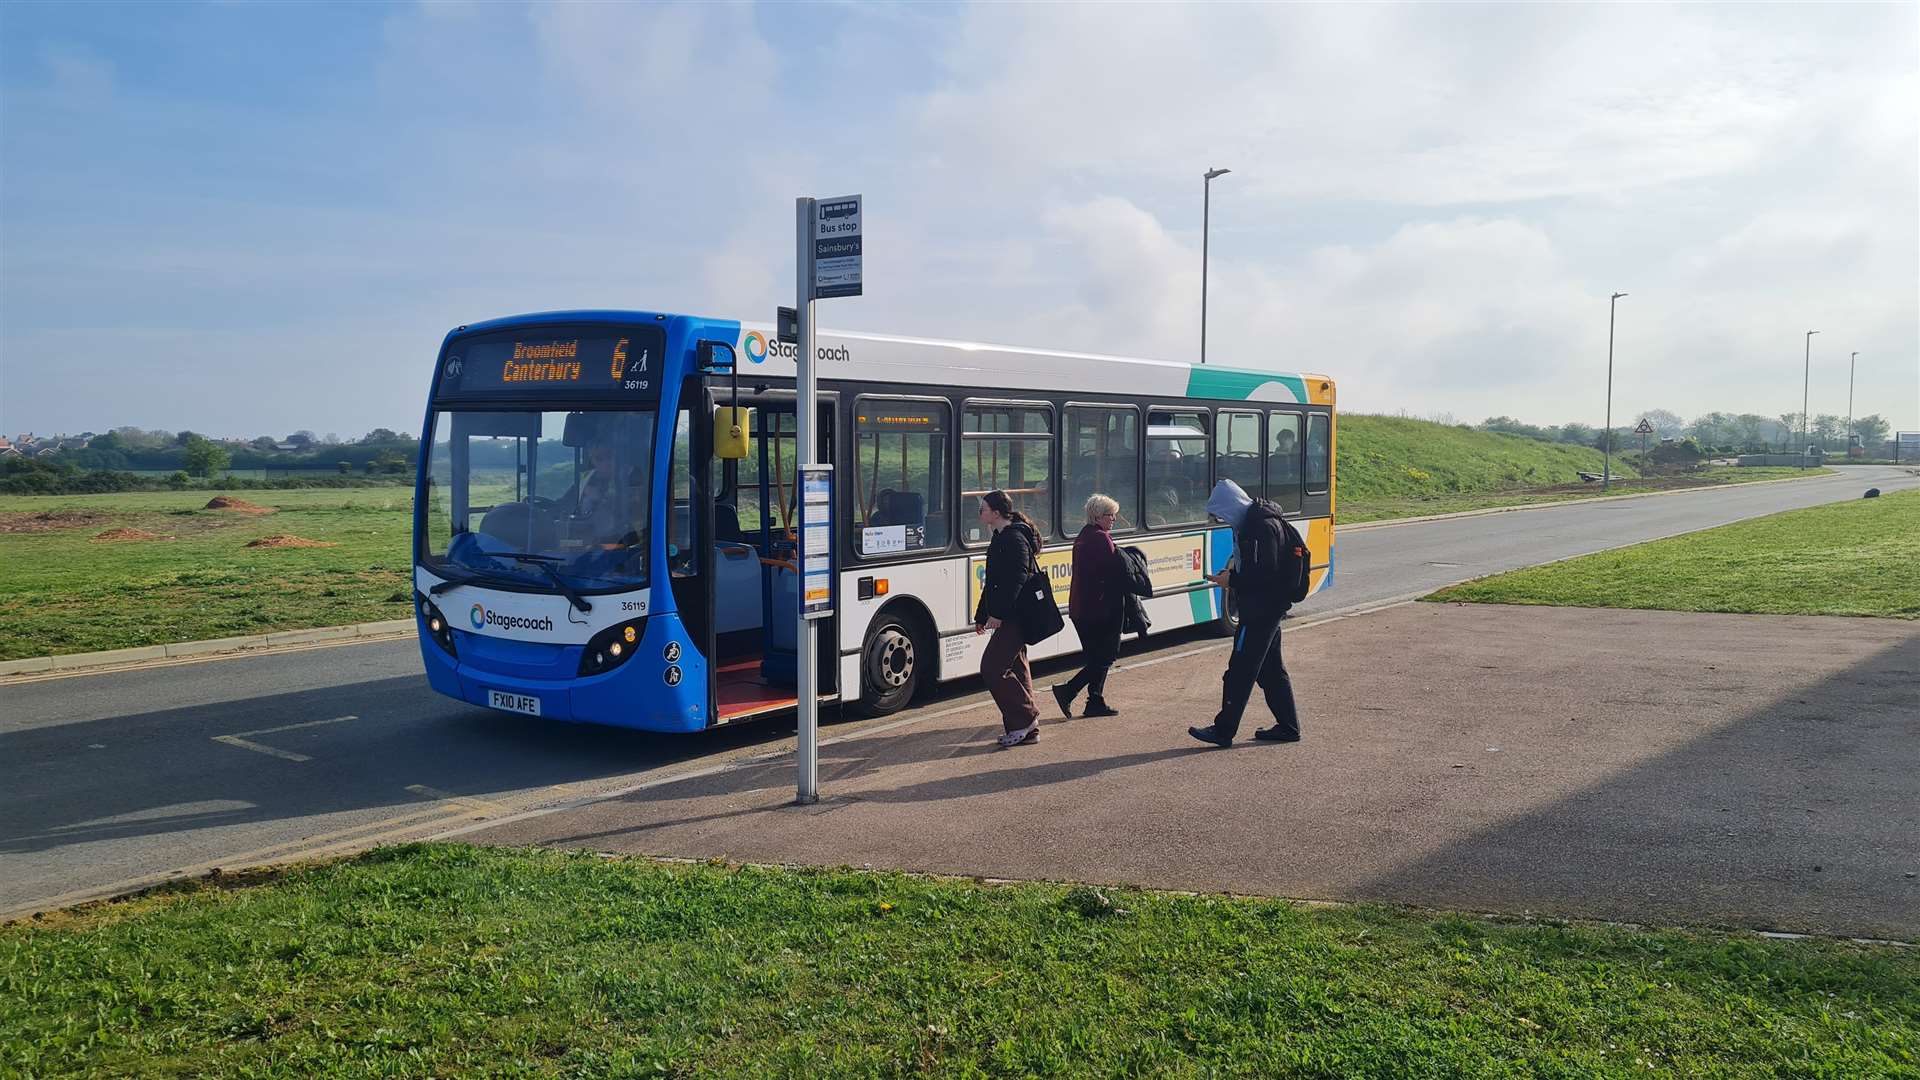 The Stagecoach number 6 bus, soon to be 602, arriving at Sainsbury's on the Altira Business Park in Herne Bay